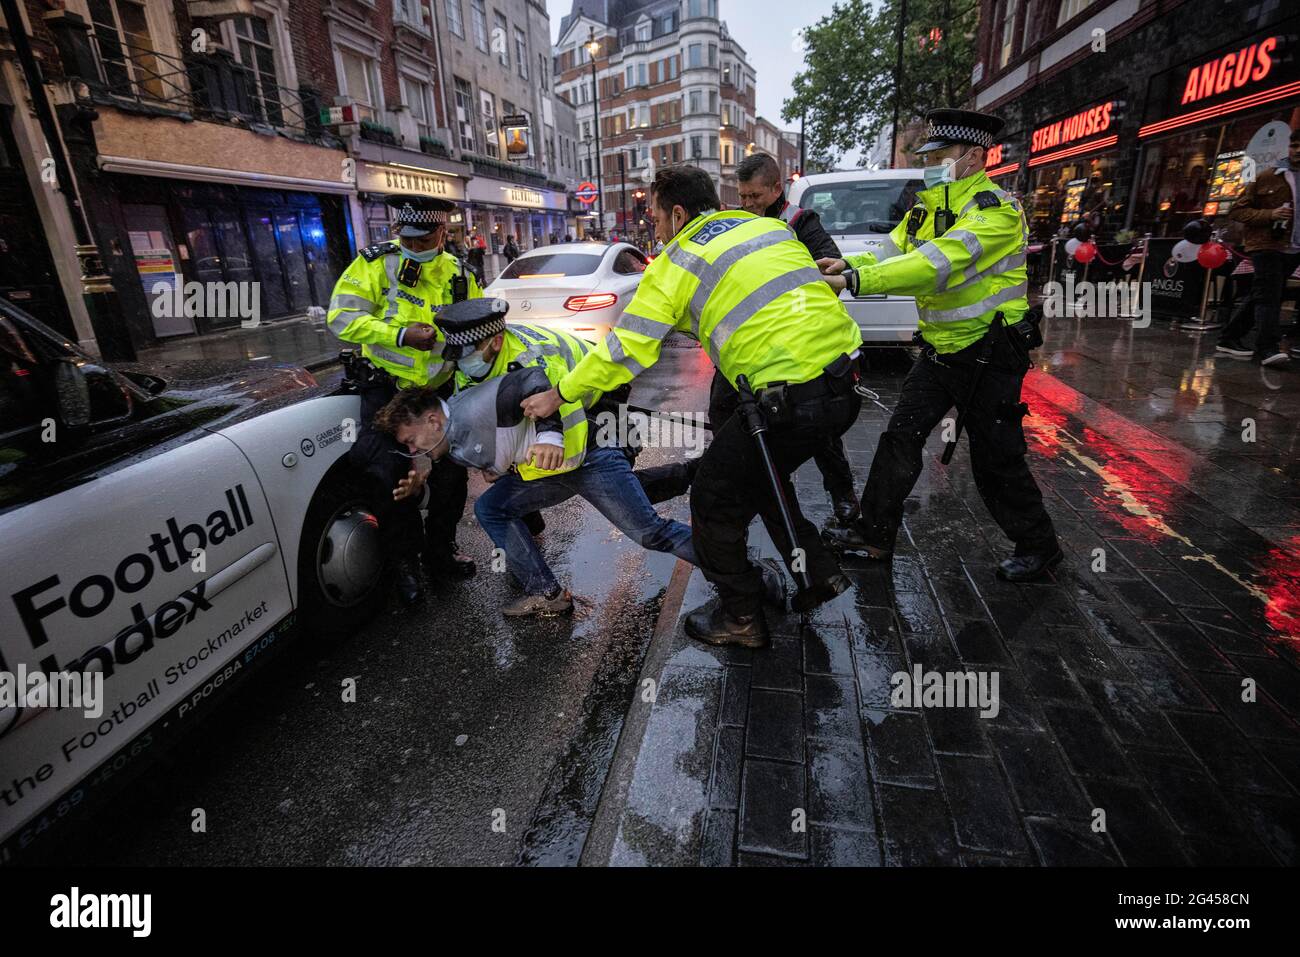 London, UK. 18th June 2021. Police make an arrest as English and Scottish fans clash in Leicester Square, Central London ahead of the EURO21 match against England. Credit: Jeff Gilbert/Alamy Live News Stock Photo